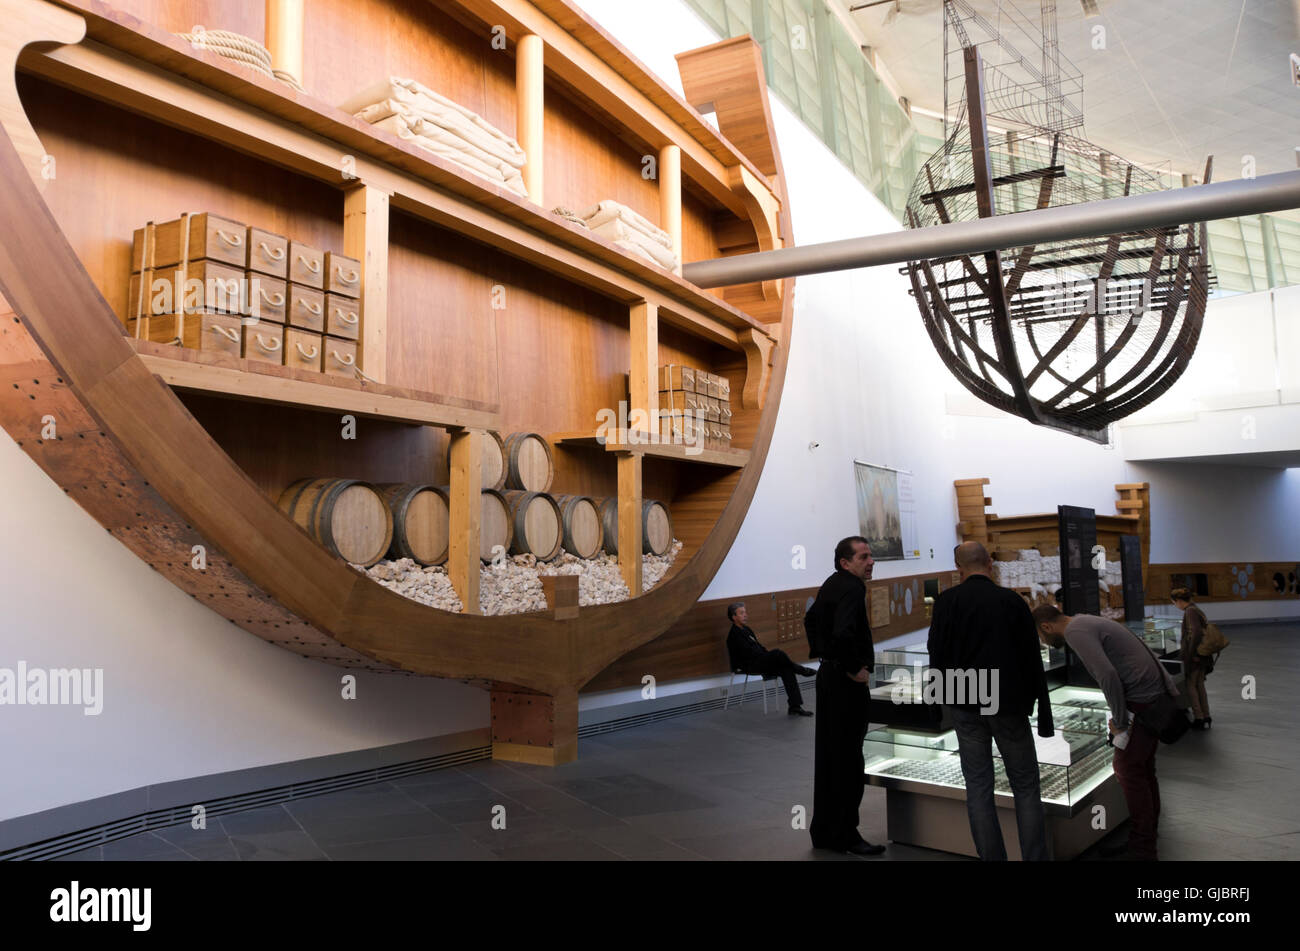 Underwater Archeology museum, model of Phoenician ship hull hangs from ceiling, cut-away of loaded ship on wall. Stock Photo